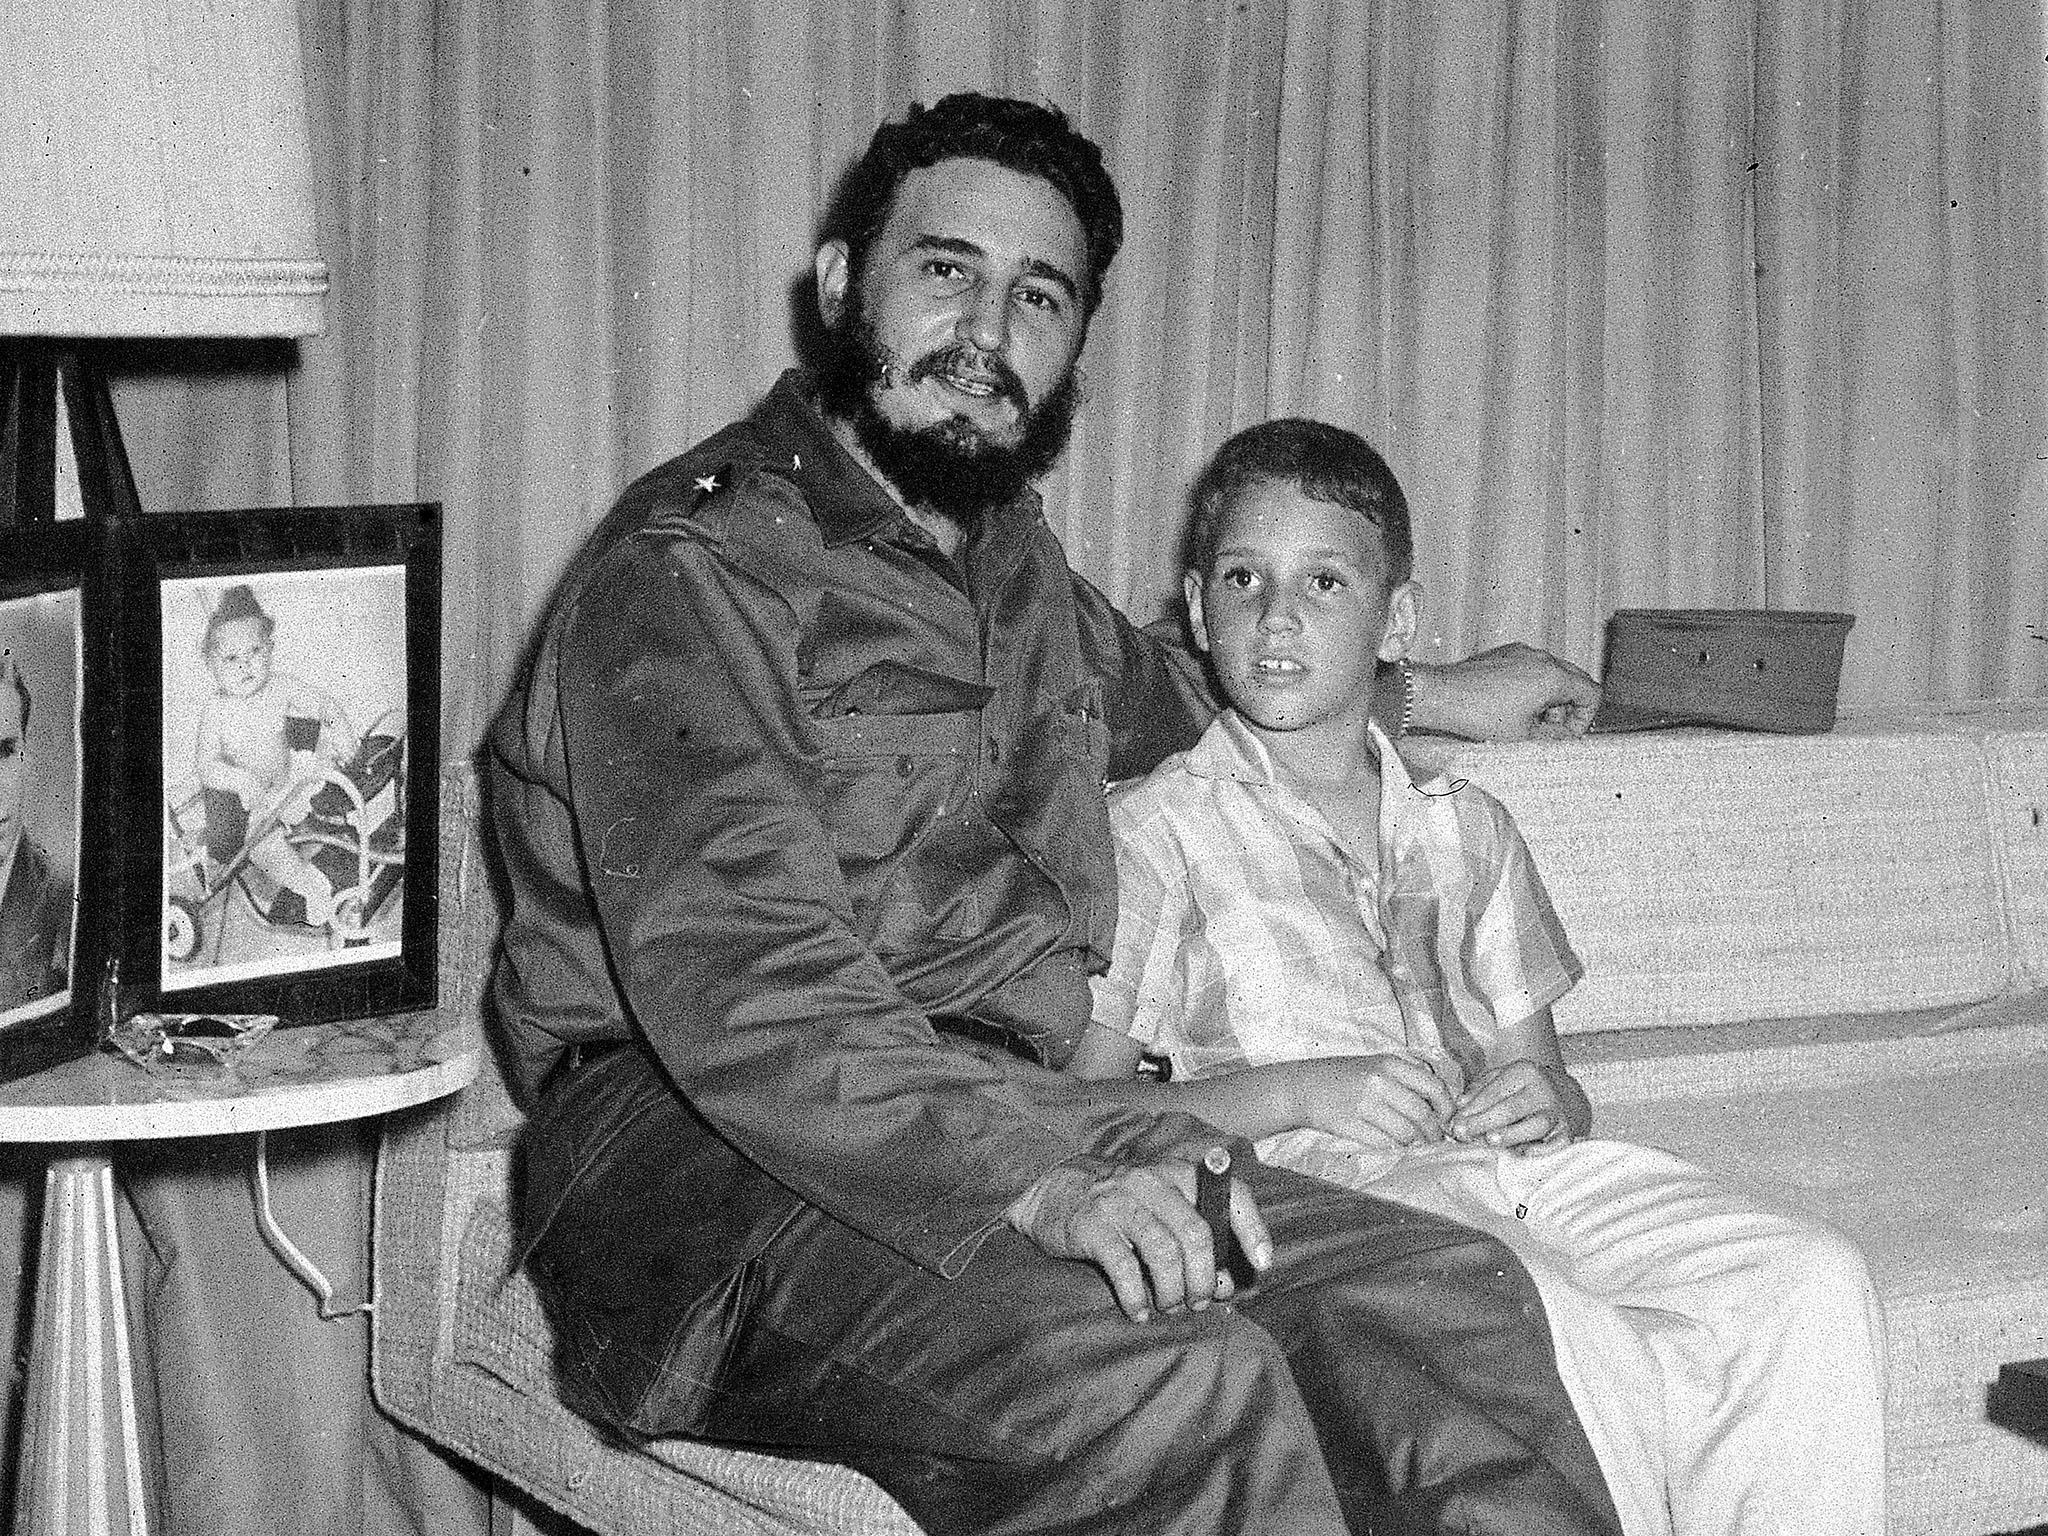 Fidel Castro Jr, son of the Cuban revolutionary leader, reportedly killed himself while being treated for clinical depression. The pair appeared together on a 1959 US TV show, when Fidelito was nine years old